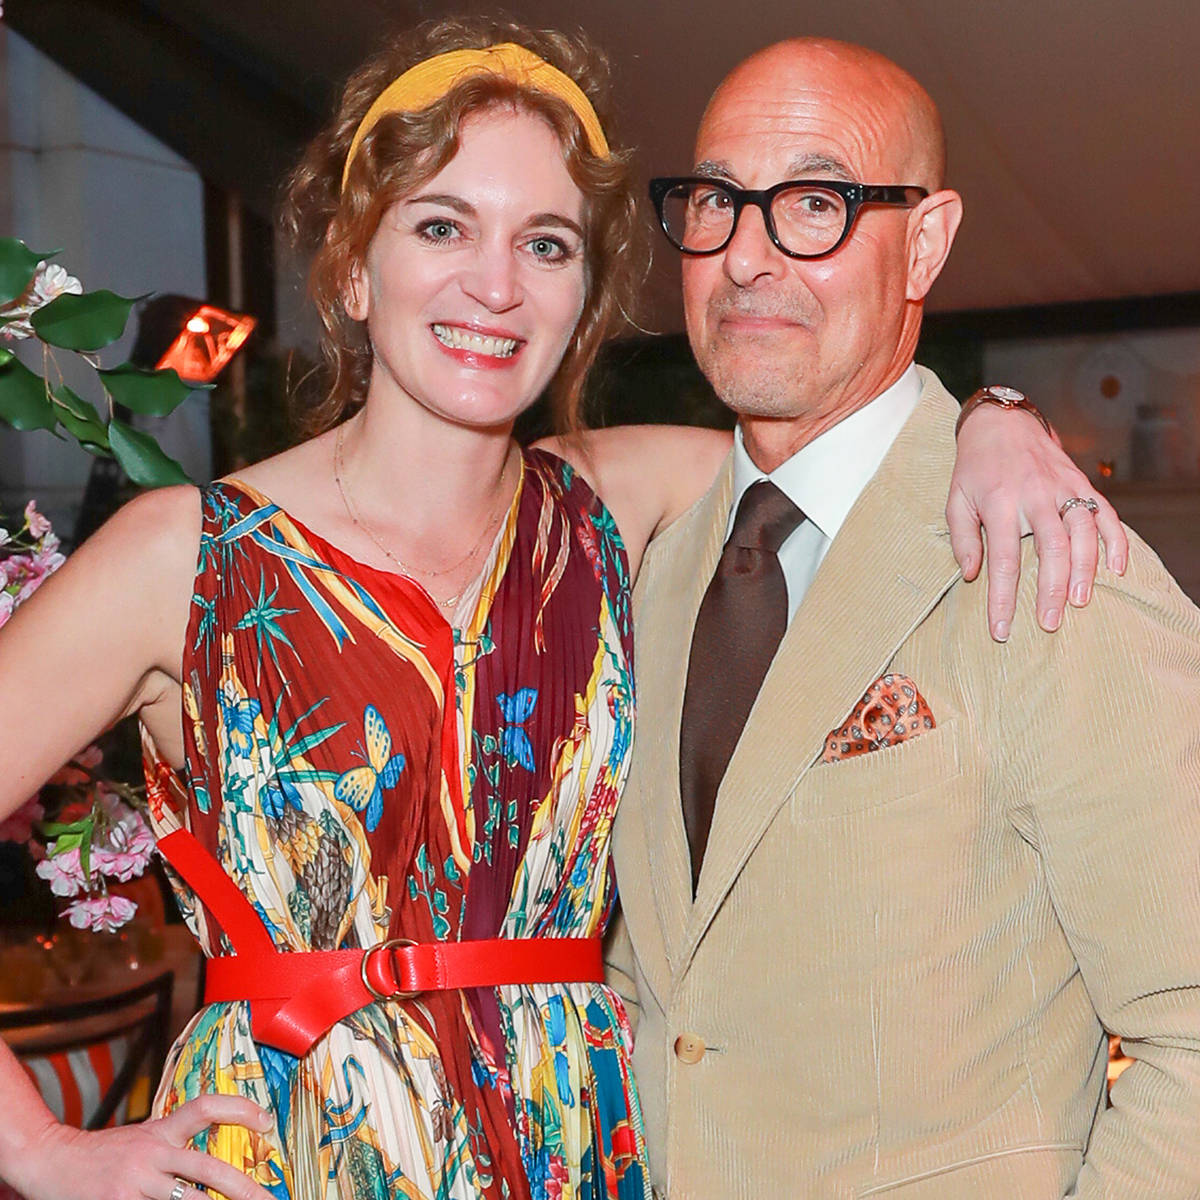 https://akns-images.eonline.com/eol_images/Entire_Site/2023614/rs_1200x1200-230714123656-1200-felicity-blunt-stanley-tucci-GettyImages-1489234062.jpg?fit=around%7C660:372&output-quality=90&crop=660:372;center,top